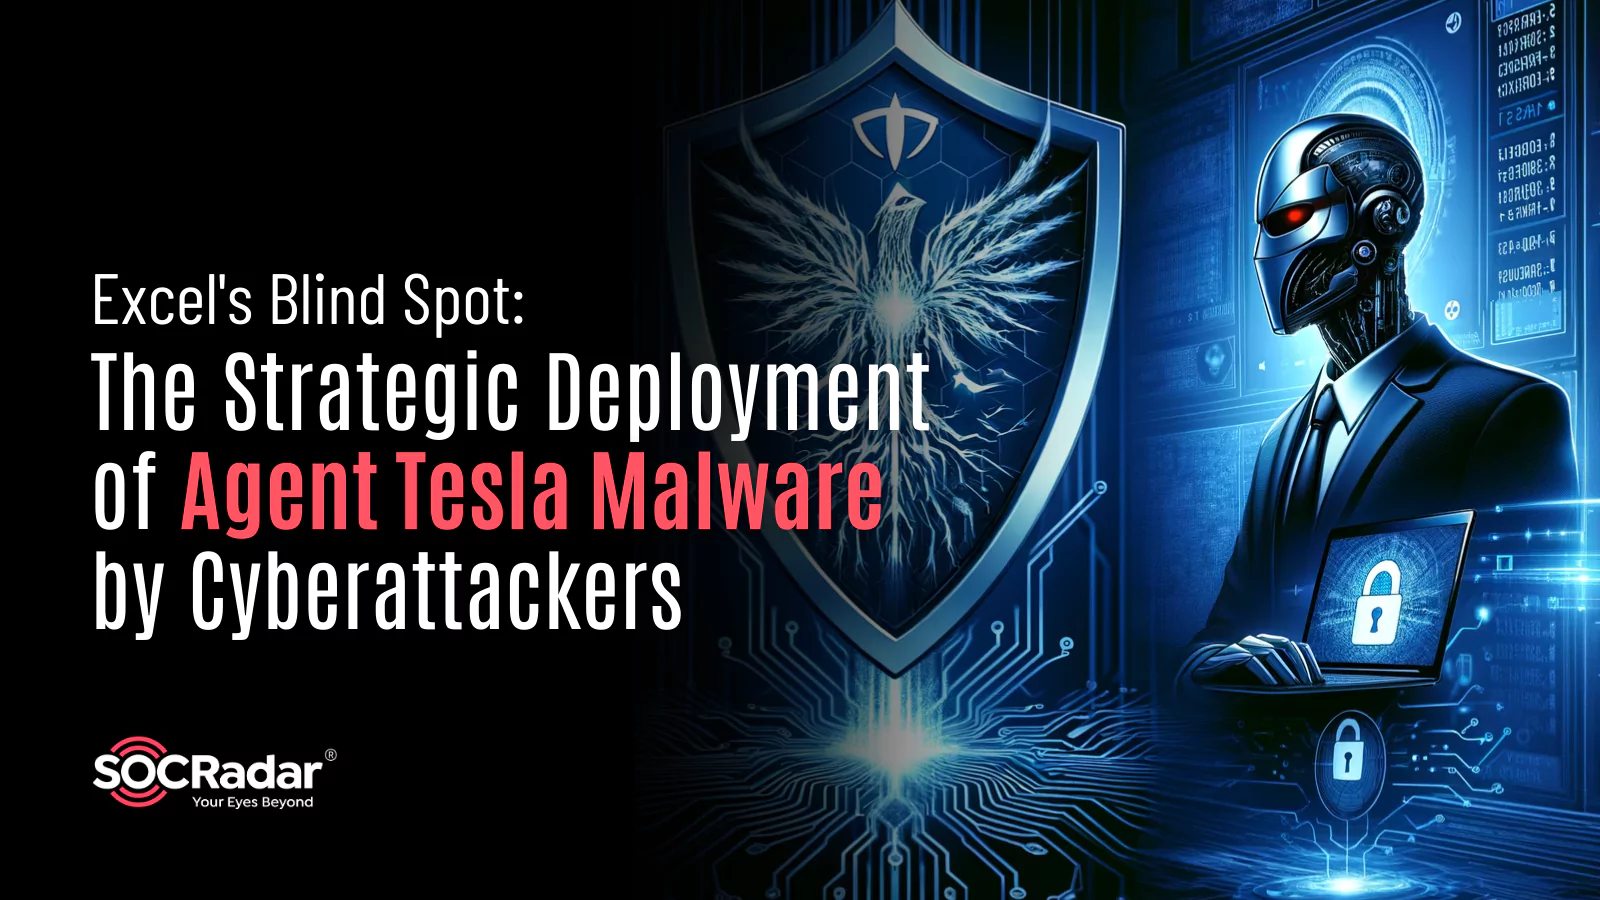 SOCRadar® Cyber Intelligence Inc. | Excel's Blind Spot: The Strategic Deployment of Agent Tesla Malware by Cyberattackers